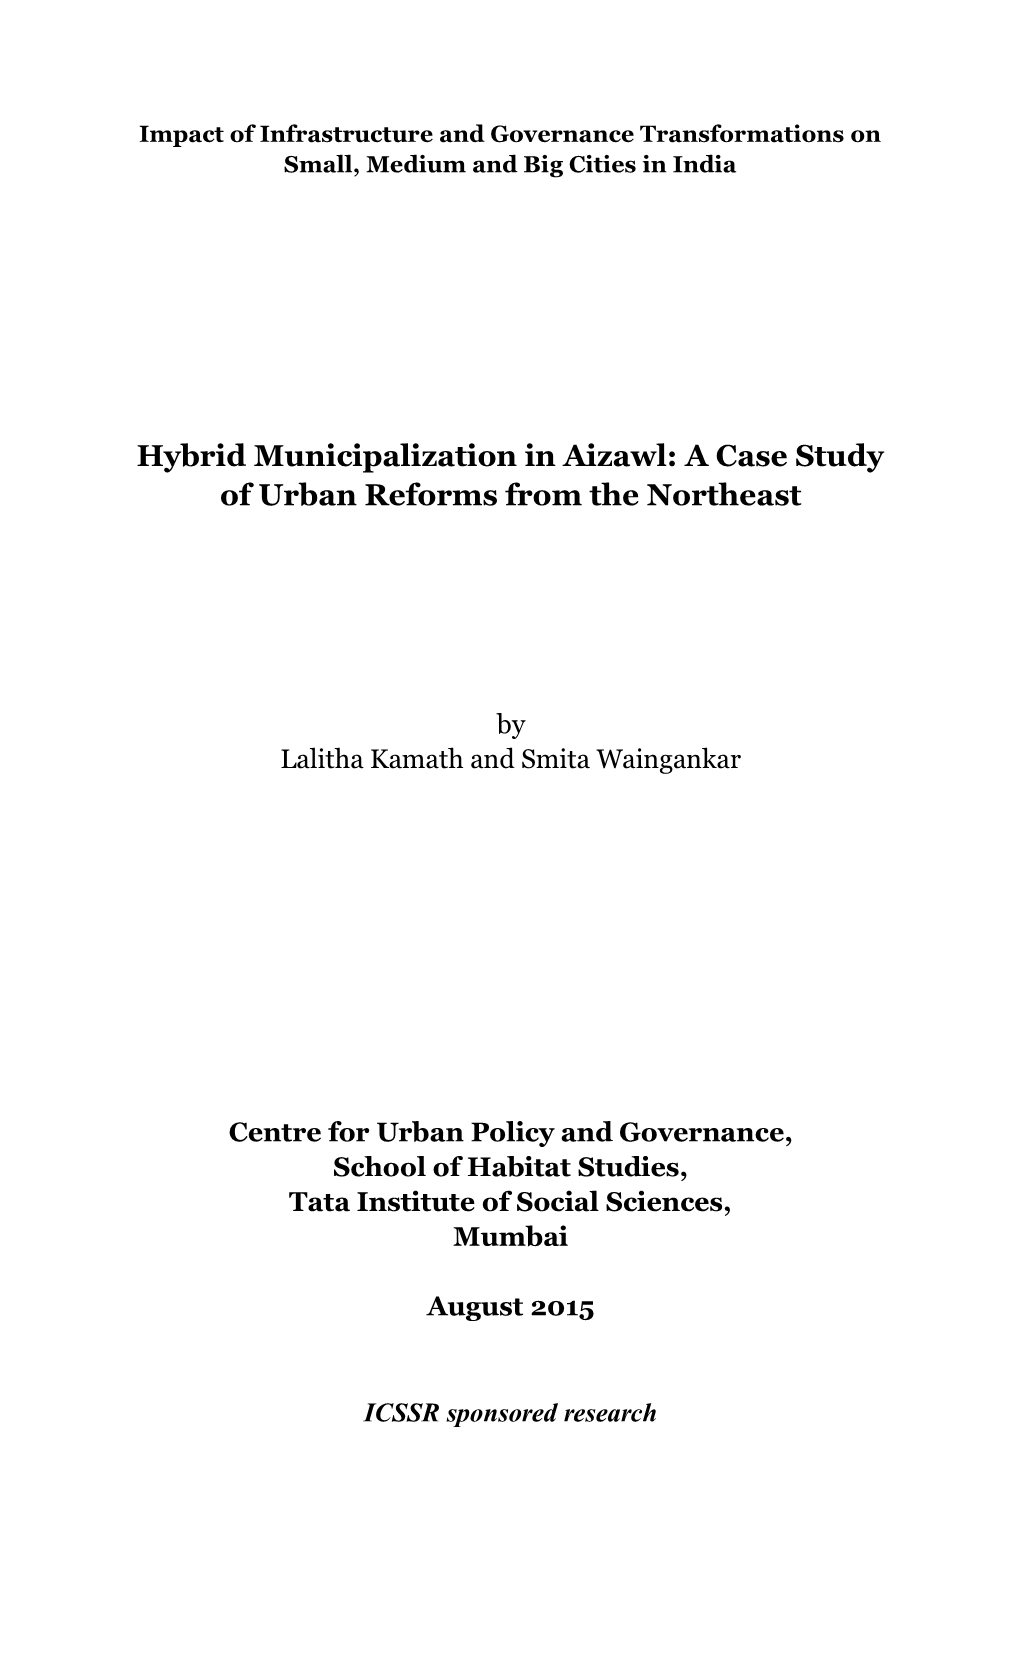 Hybrid Municipalization in Aizawl: a Case Study of Urban Reforms from the Northeast